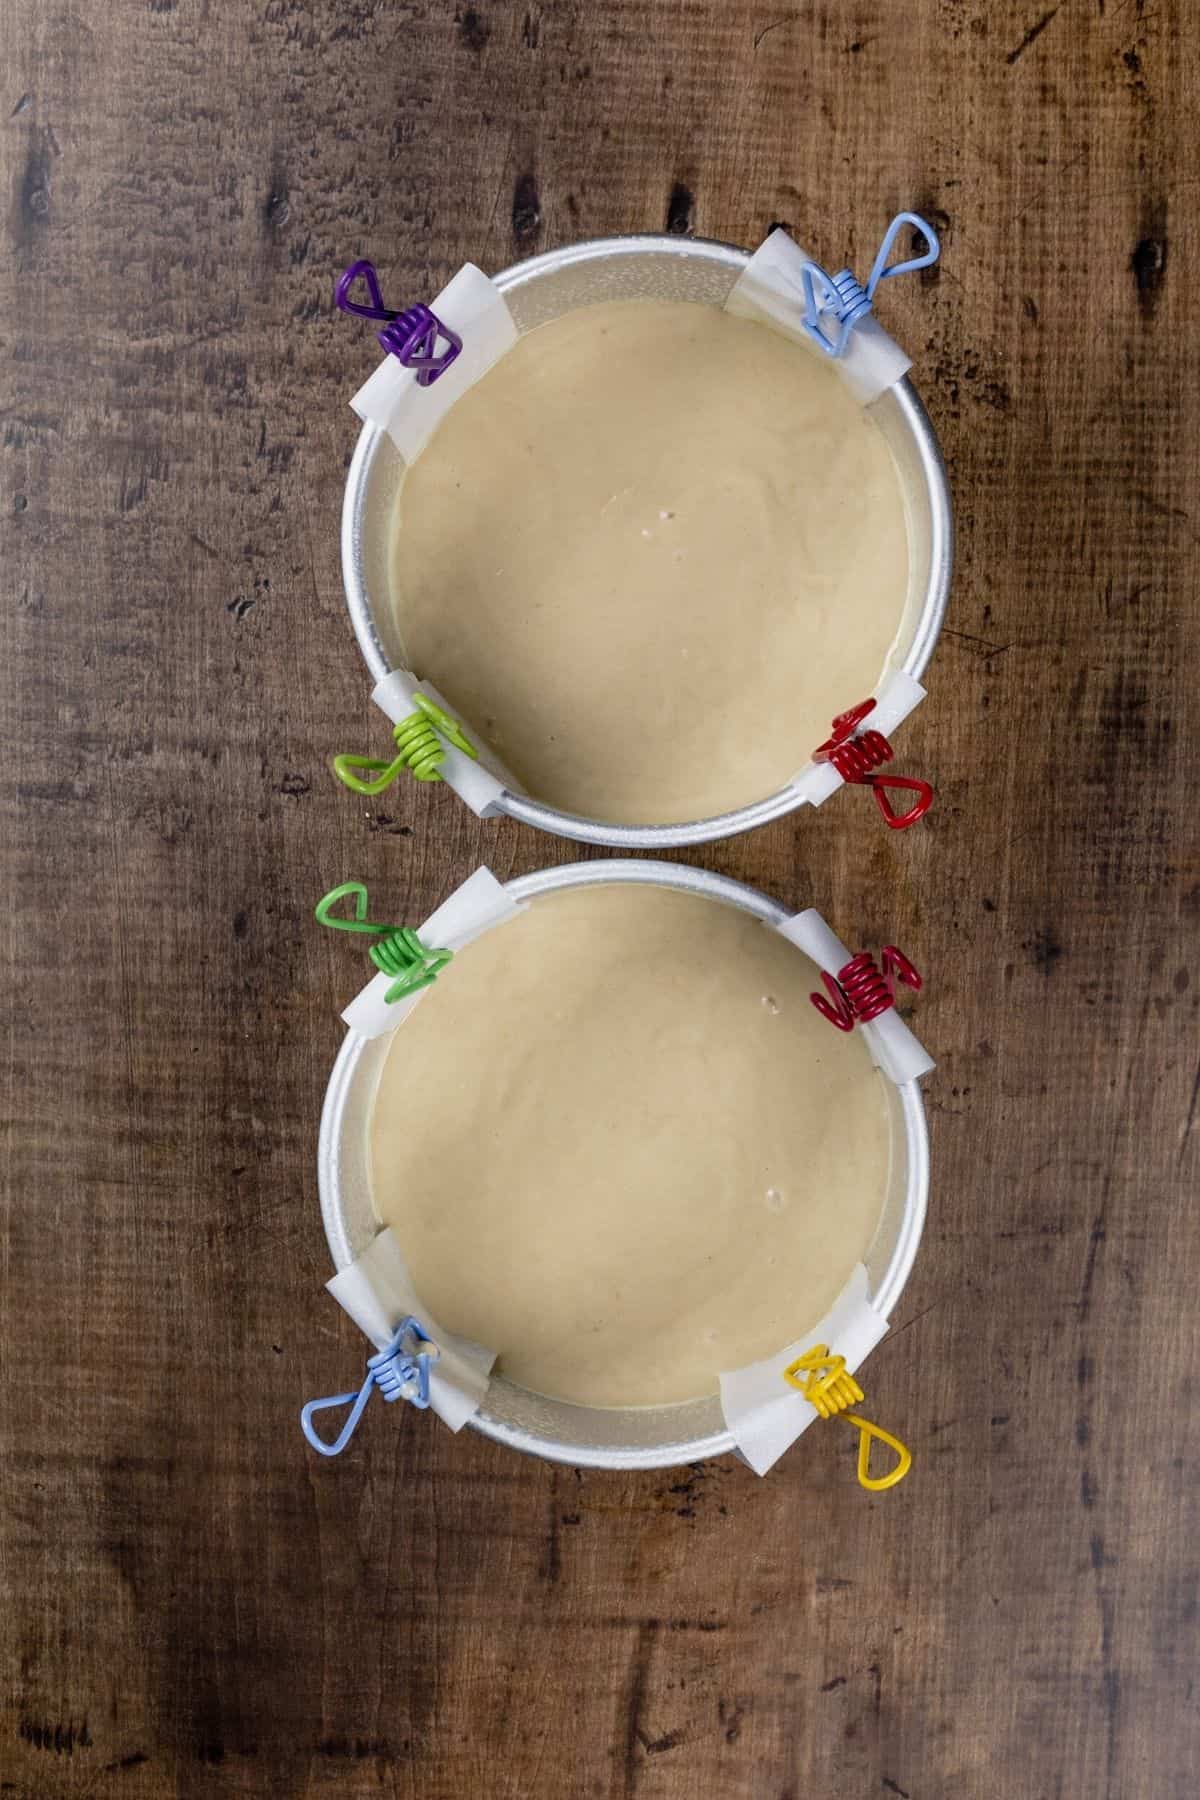 Two cake pans are filled with the finished cake batter. Strips of parchment paper are held in place by small clips.